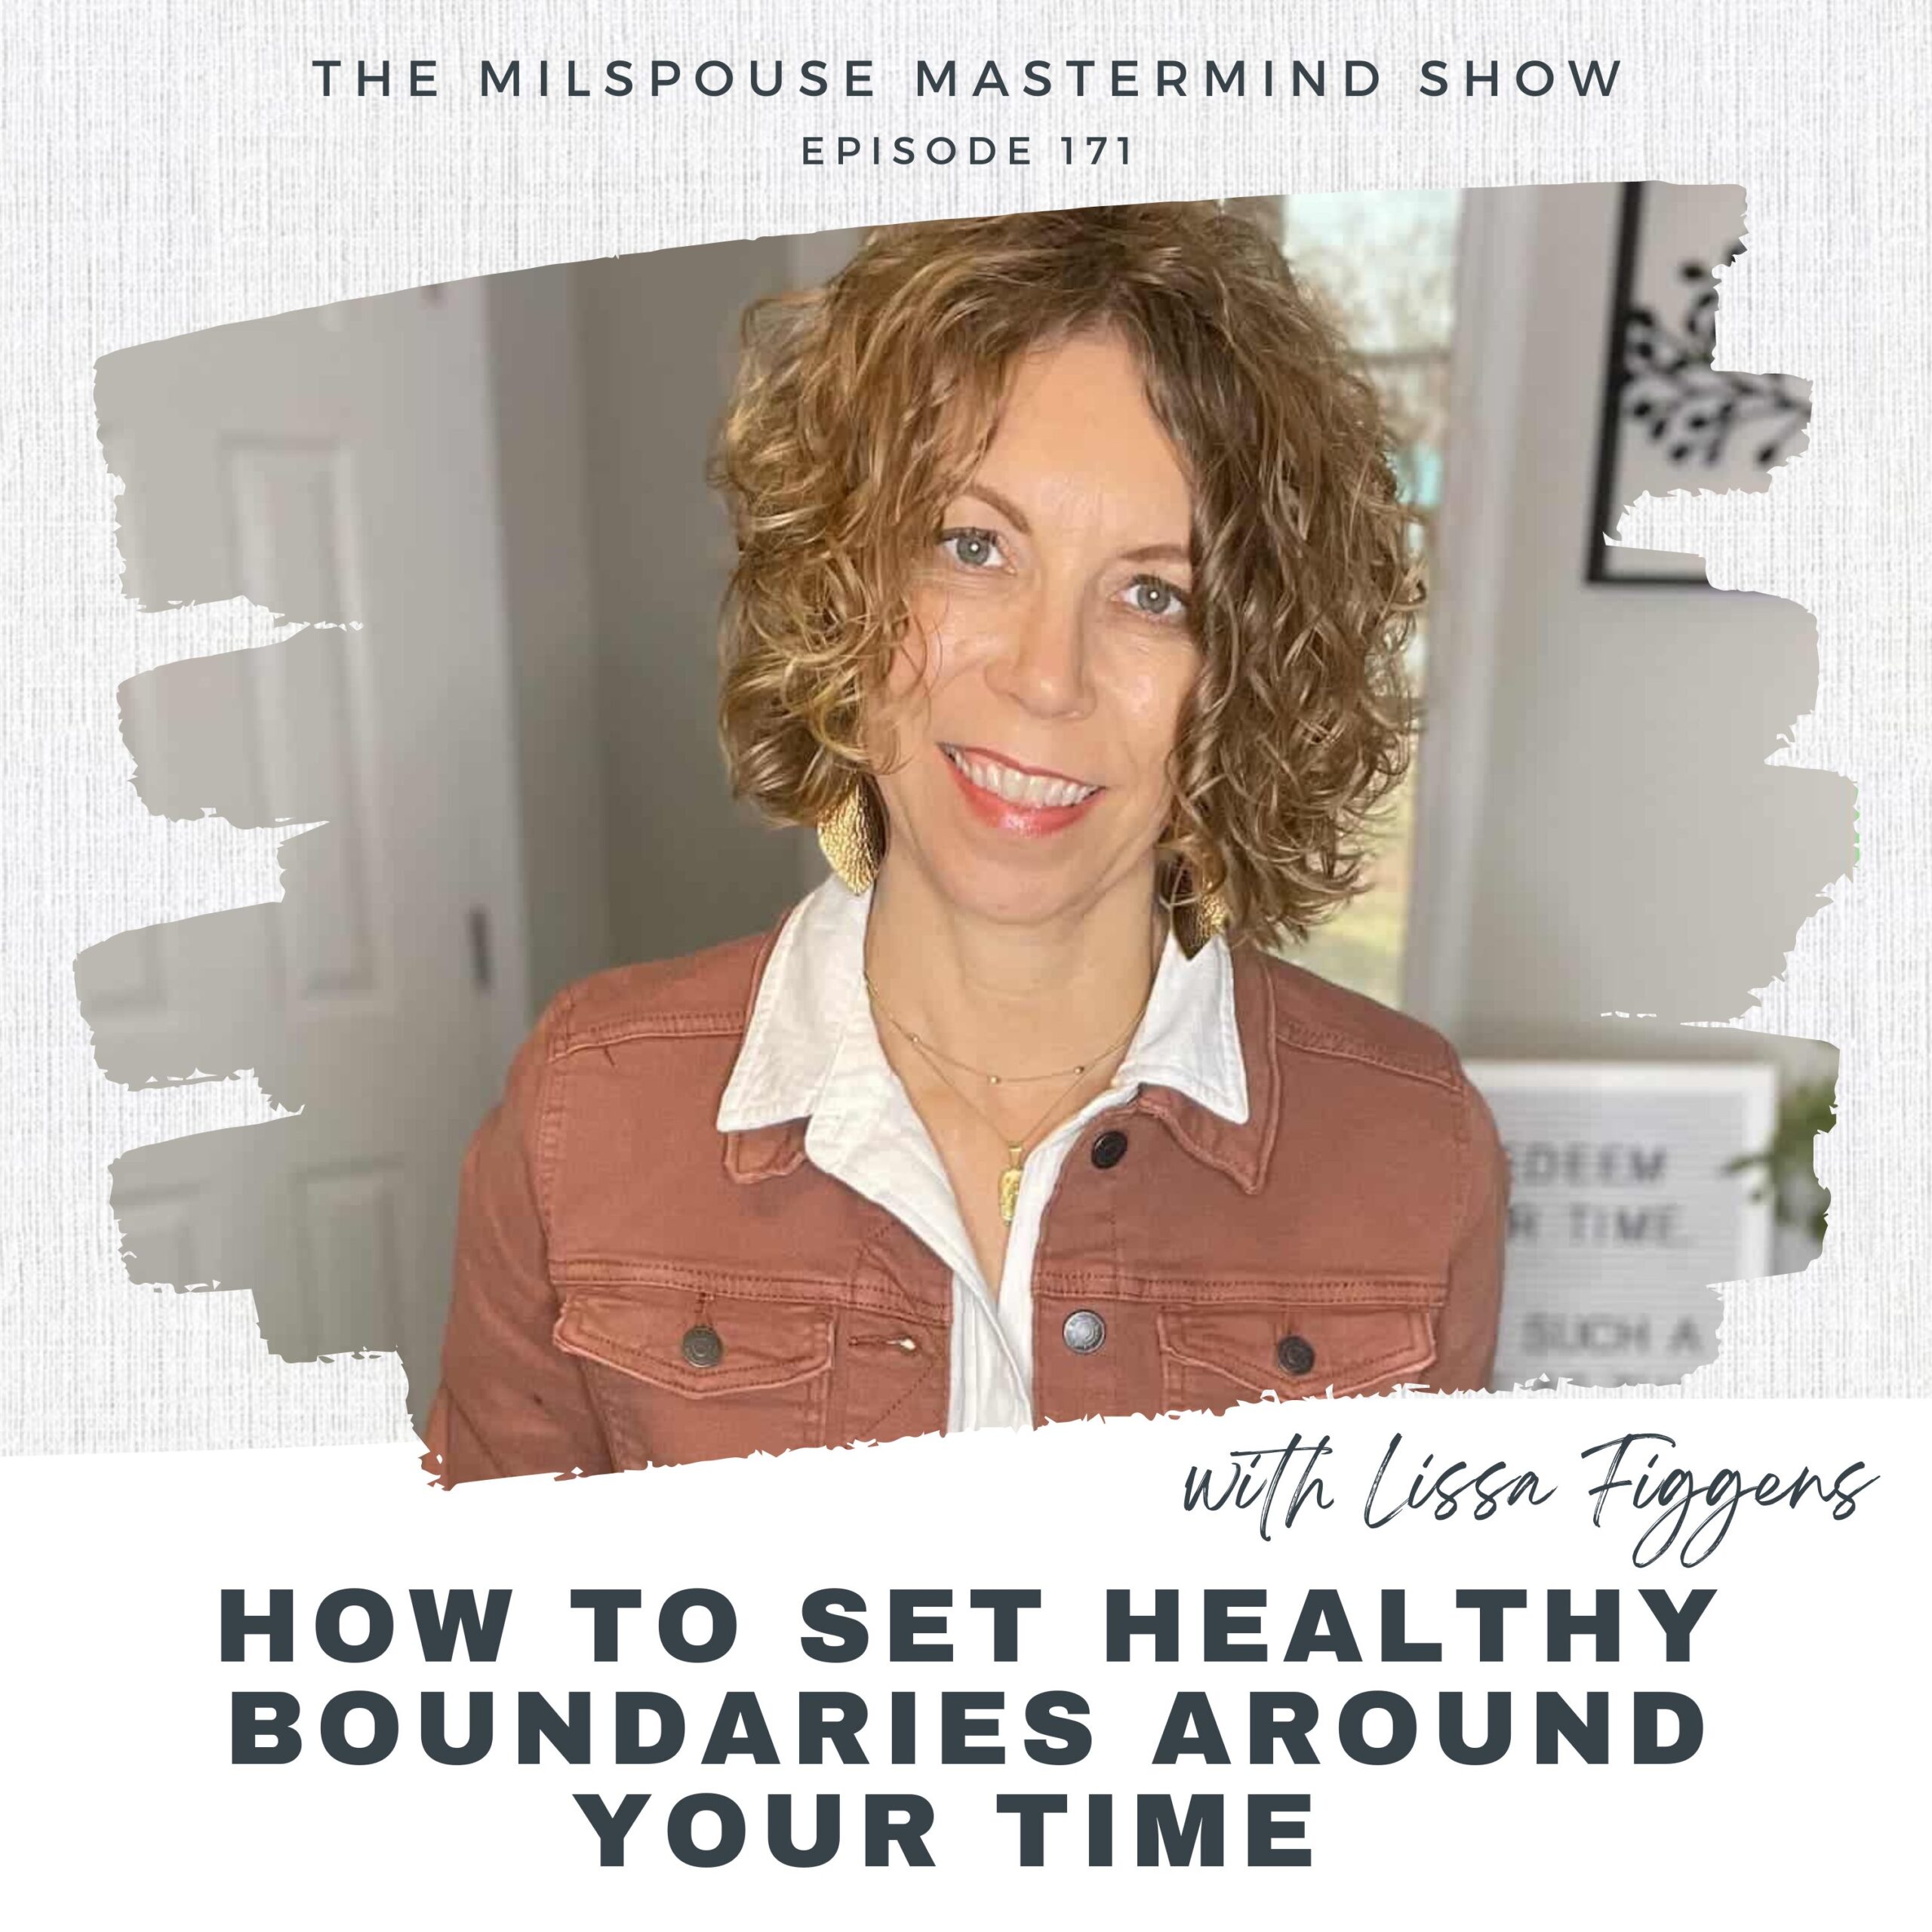 How to Set Healthy Boundaries Around Your Time